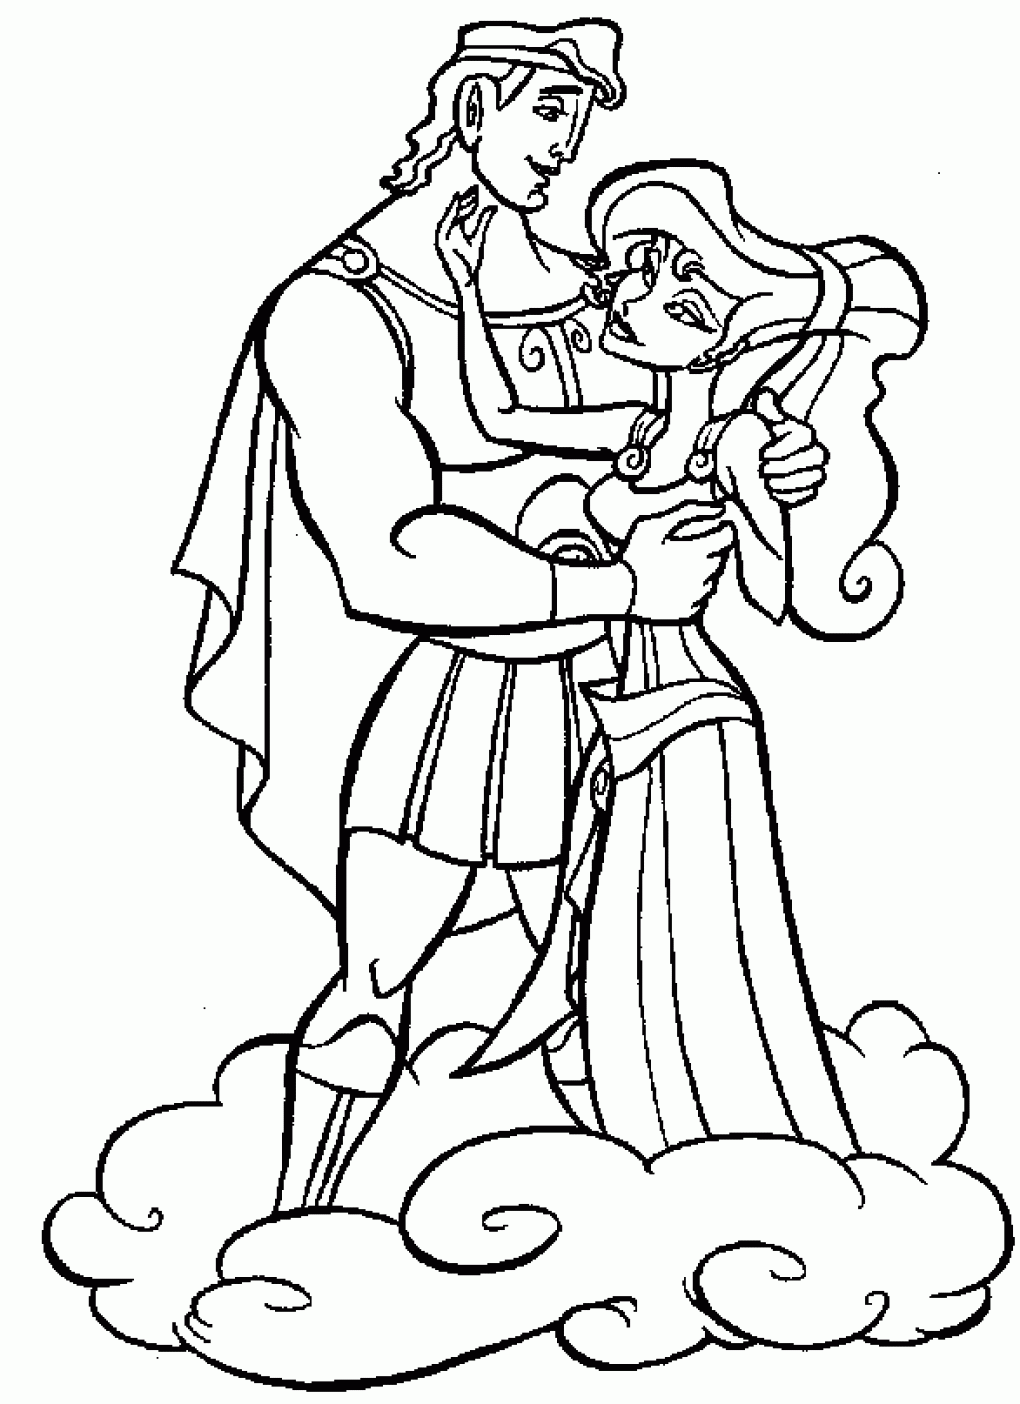 Free Printable Hercules Coloring Pages For Kids Coloring Wallpapers Download Free Images Wallpaper [coloring654.blogspot.com]